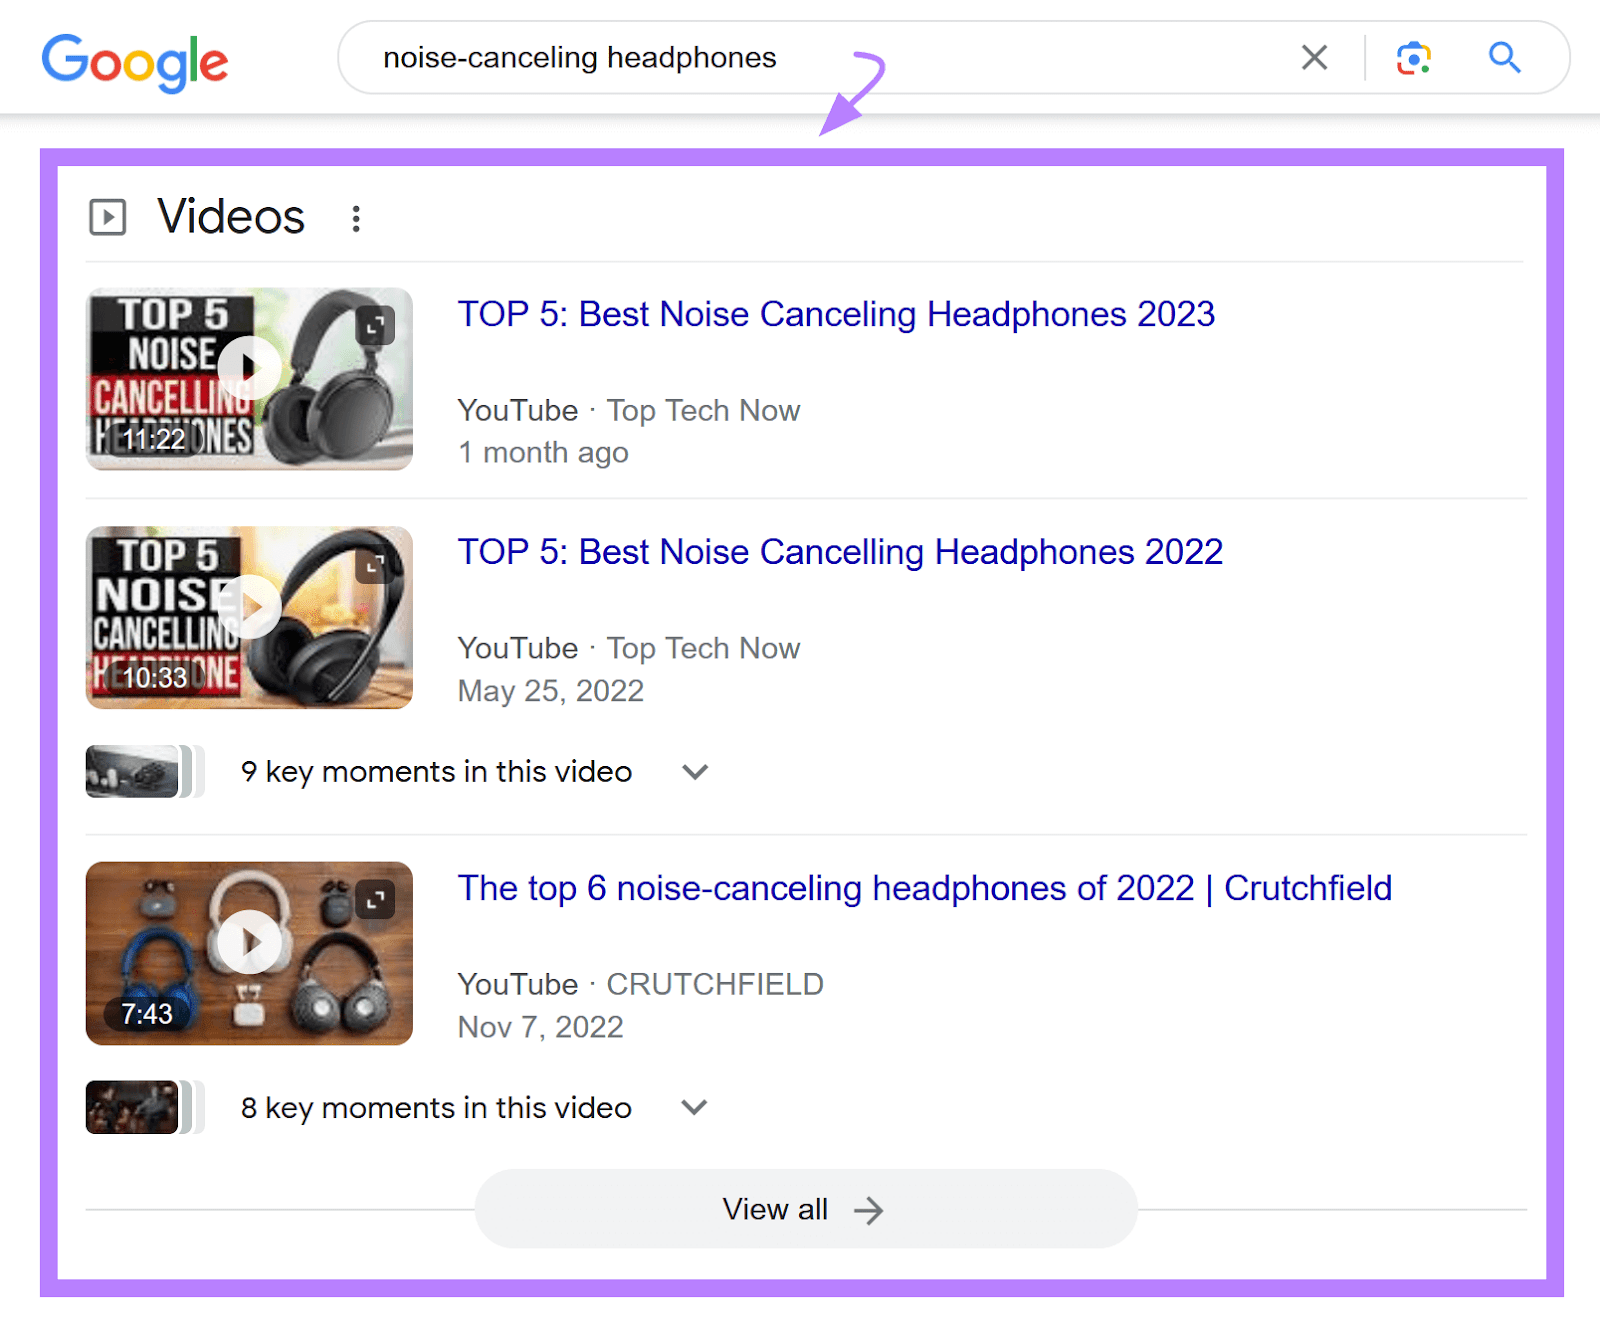 Video carousel example on Google SERP for the keyword "noise-canceling headphones."